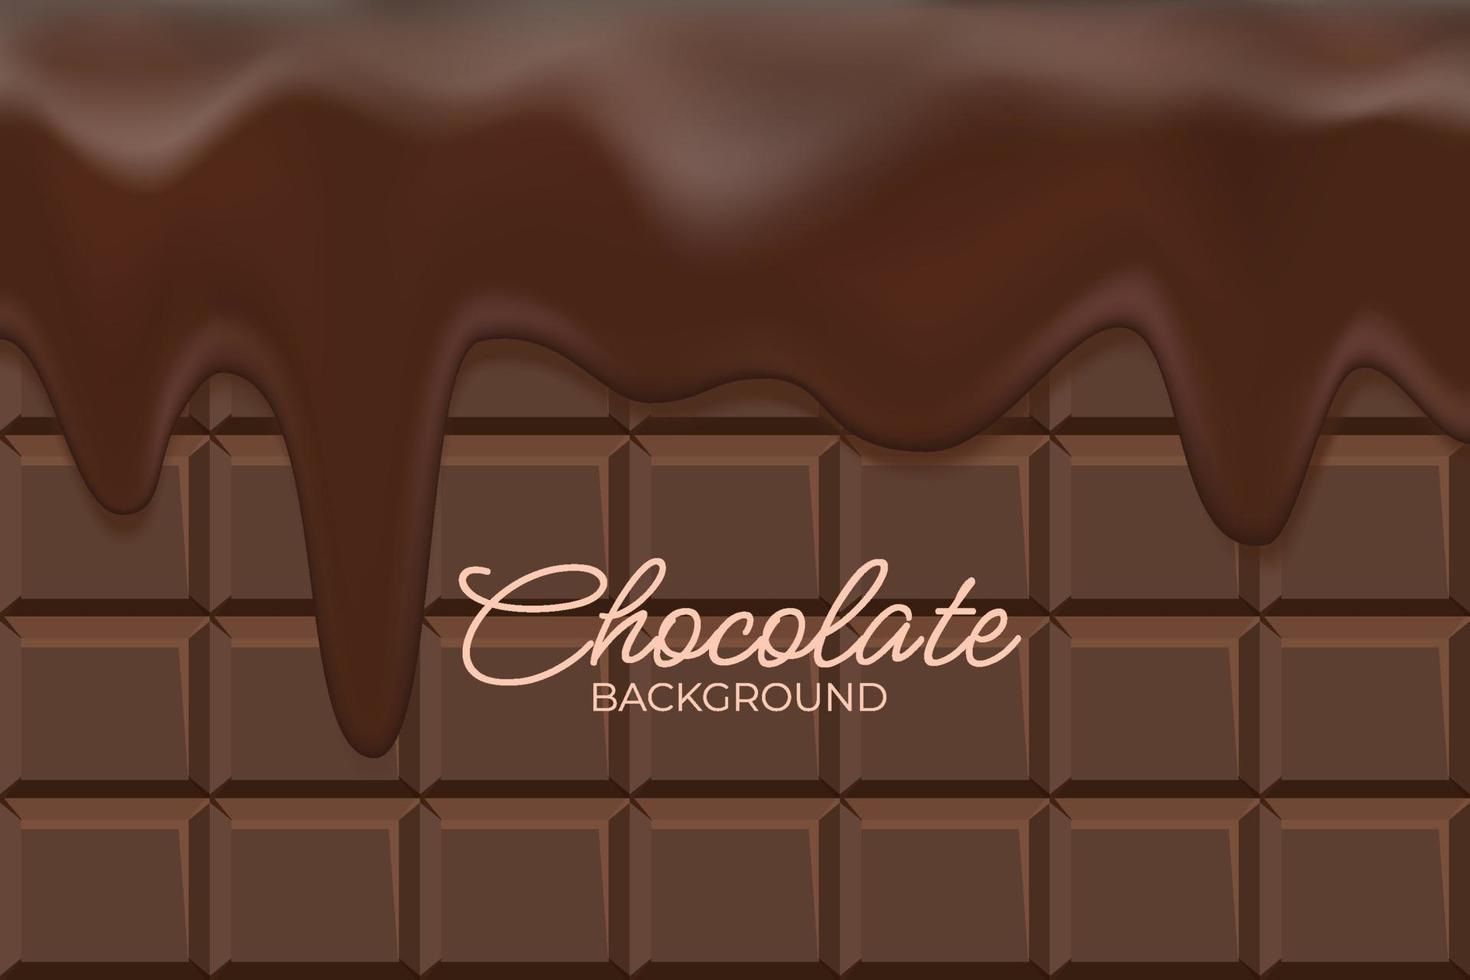 Dripping Chocolate Background Concept vector